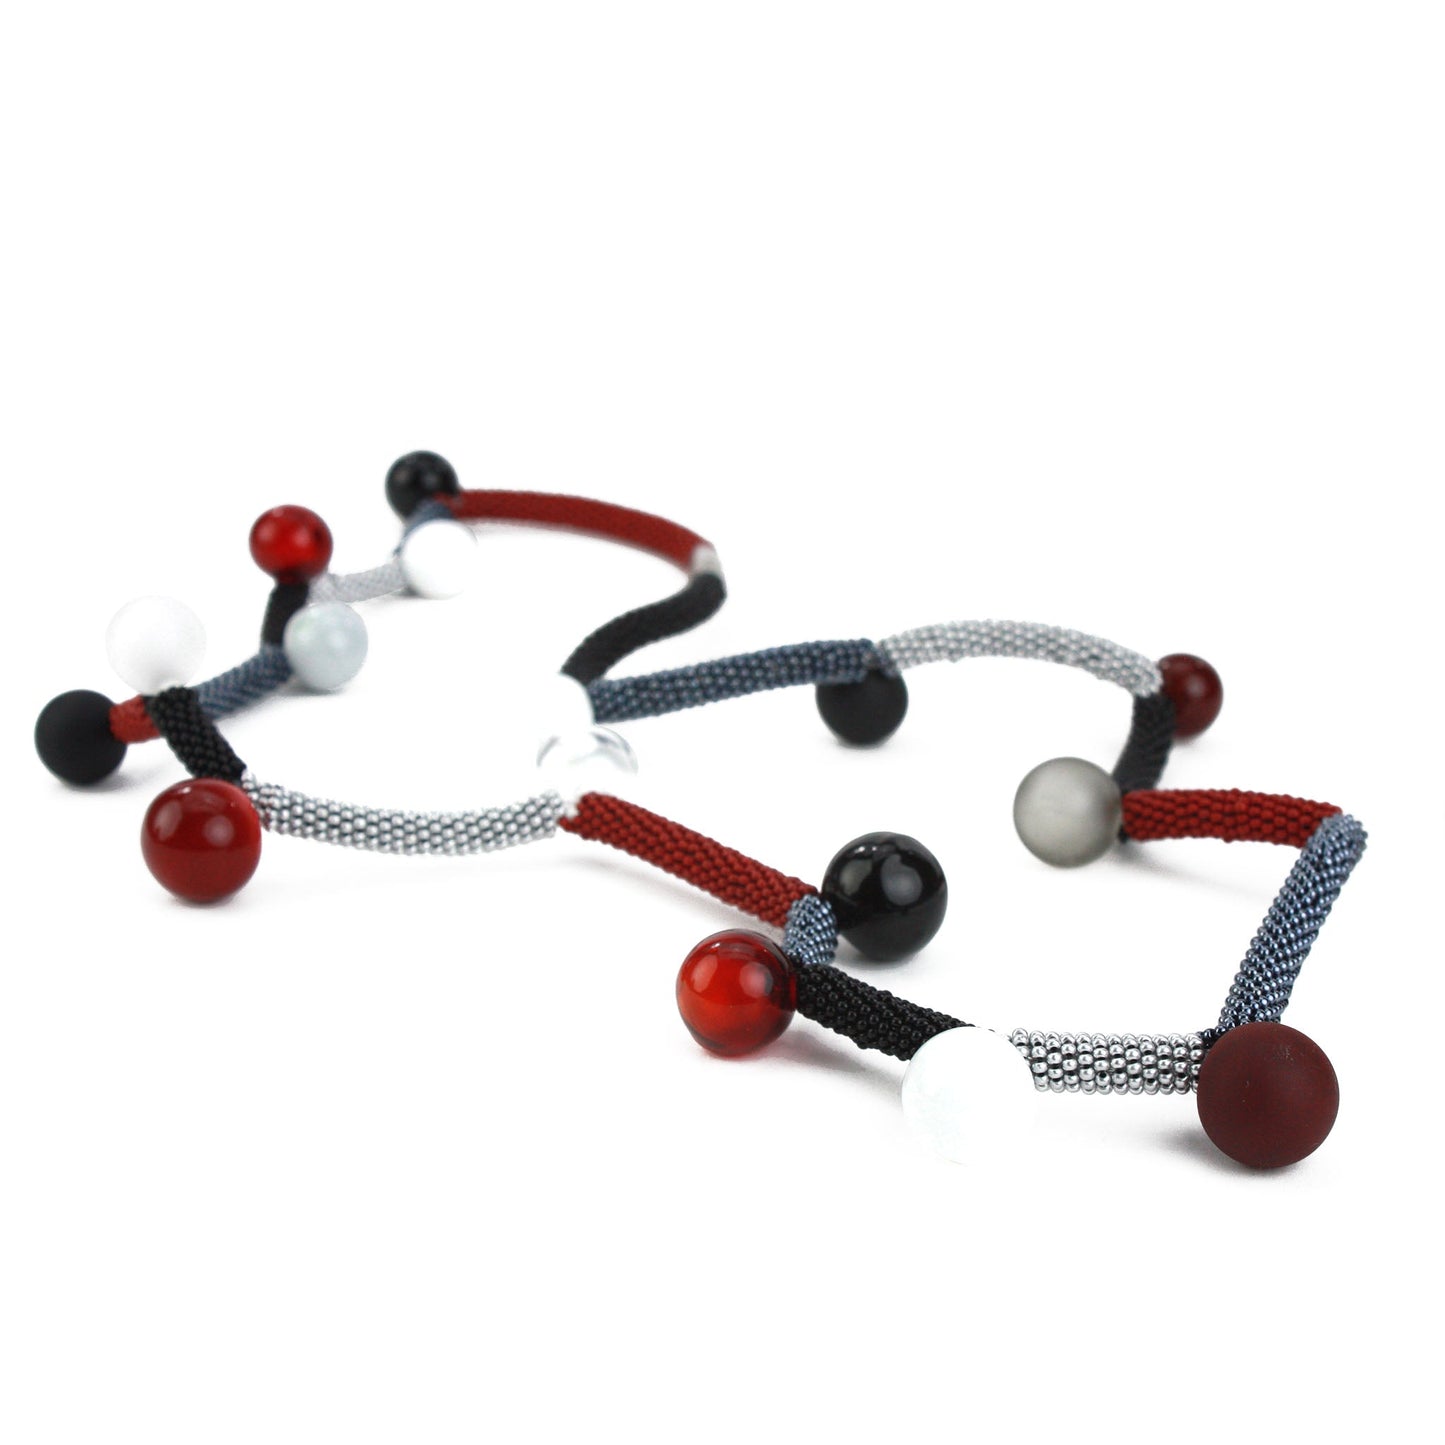 Bolla Zig Zag necklace - black, white and red